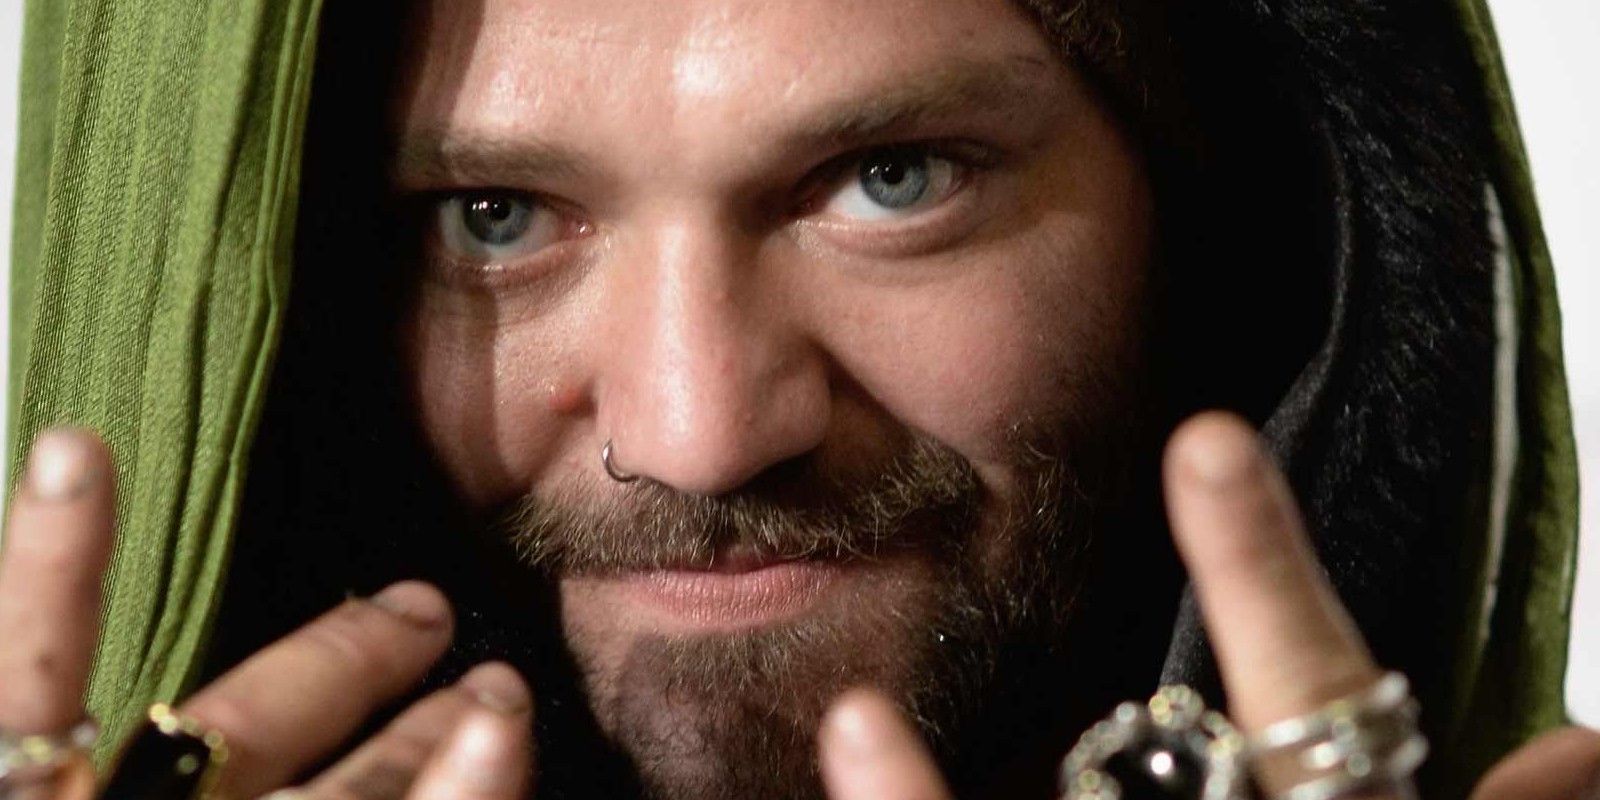 Bam Margera looks into the camera